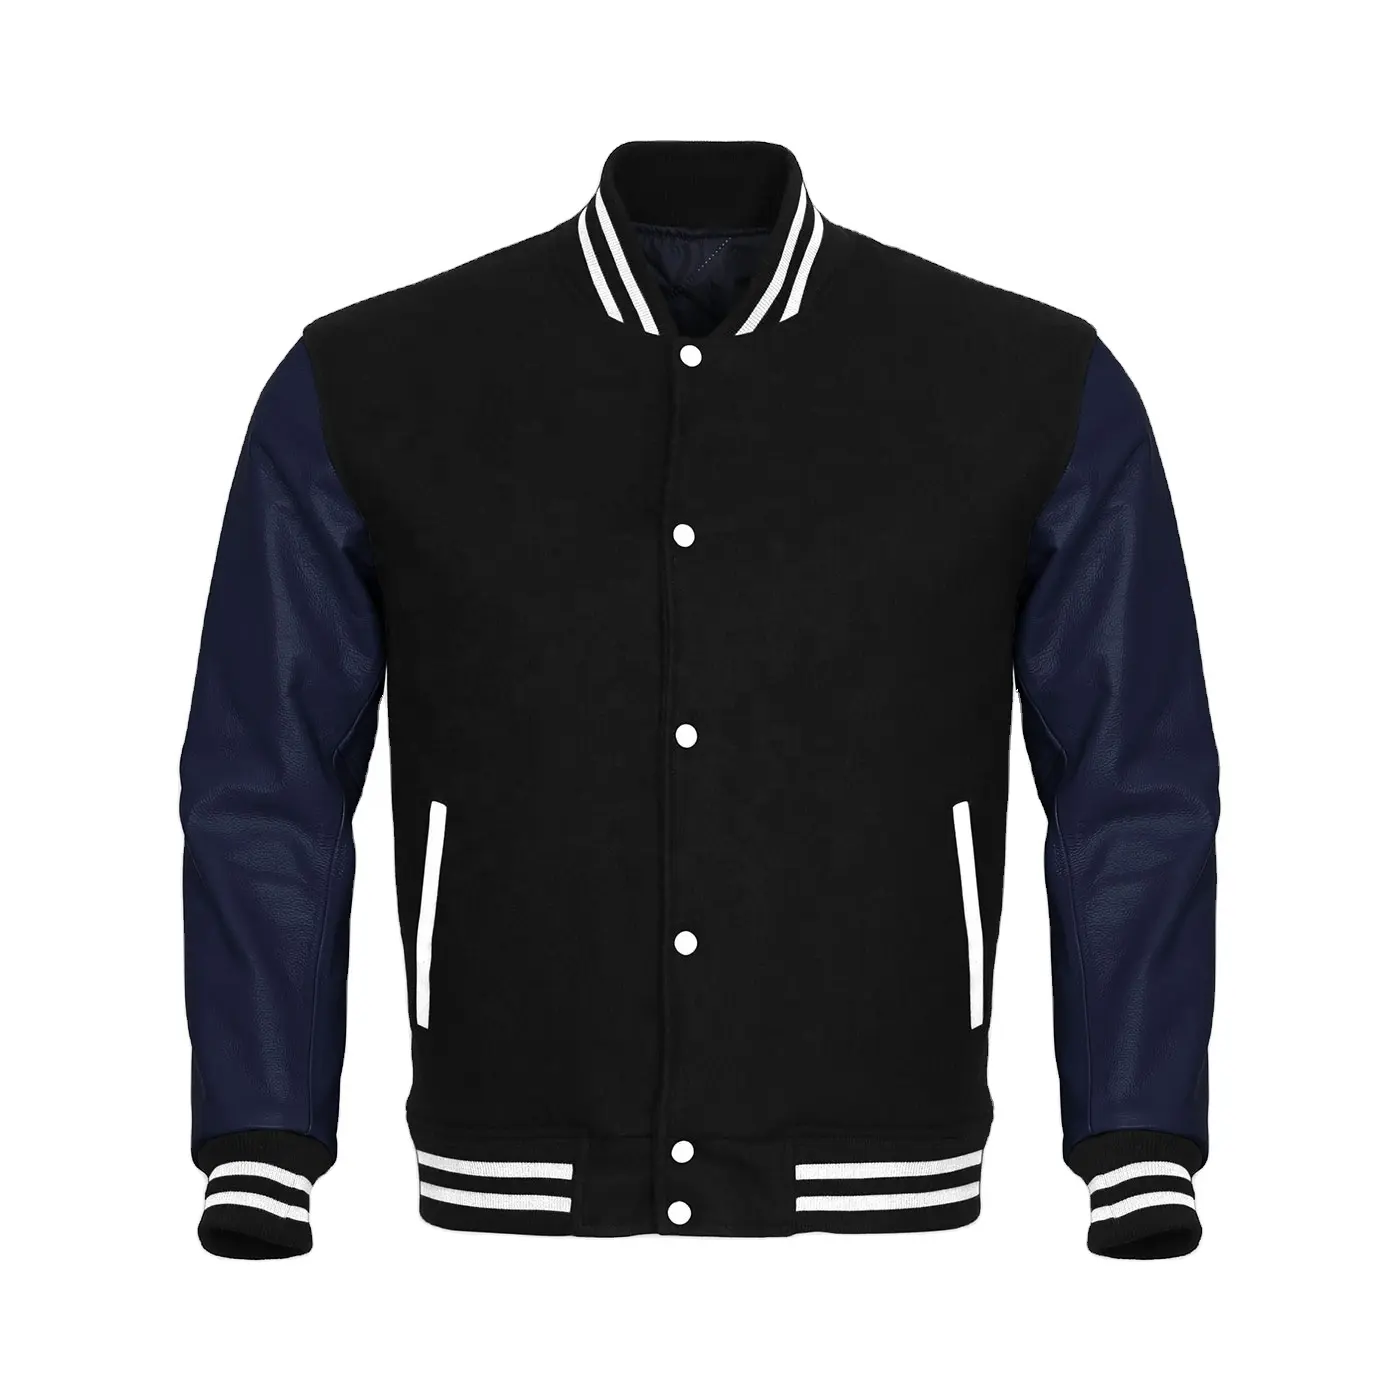 Good Quality Casual Wear Baseball Wool & Leather Varsity Jacket For Amazon Sellers